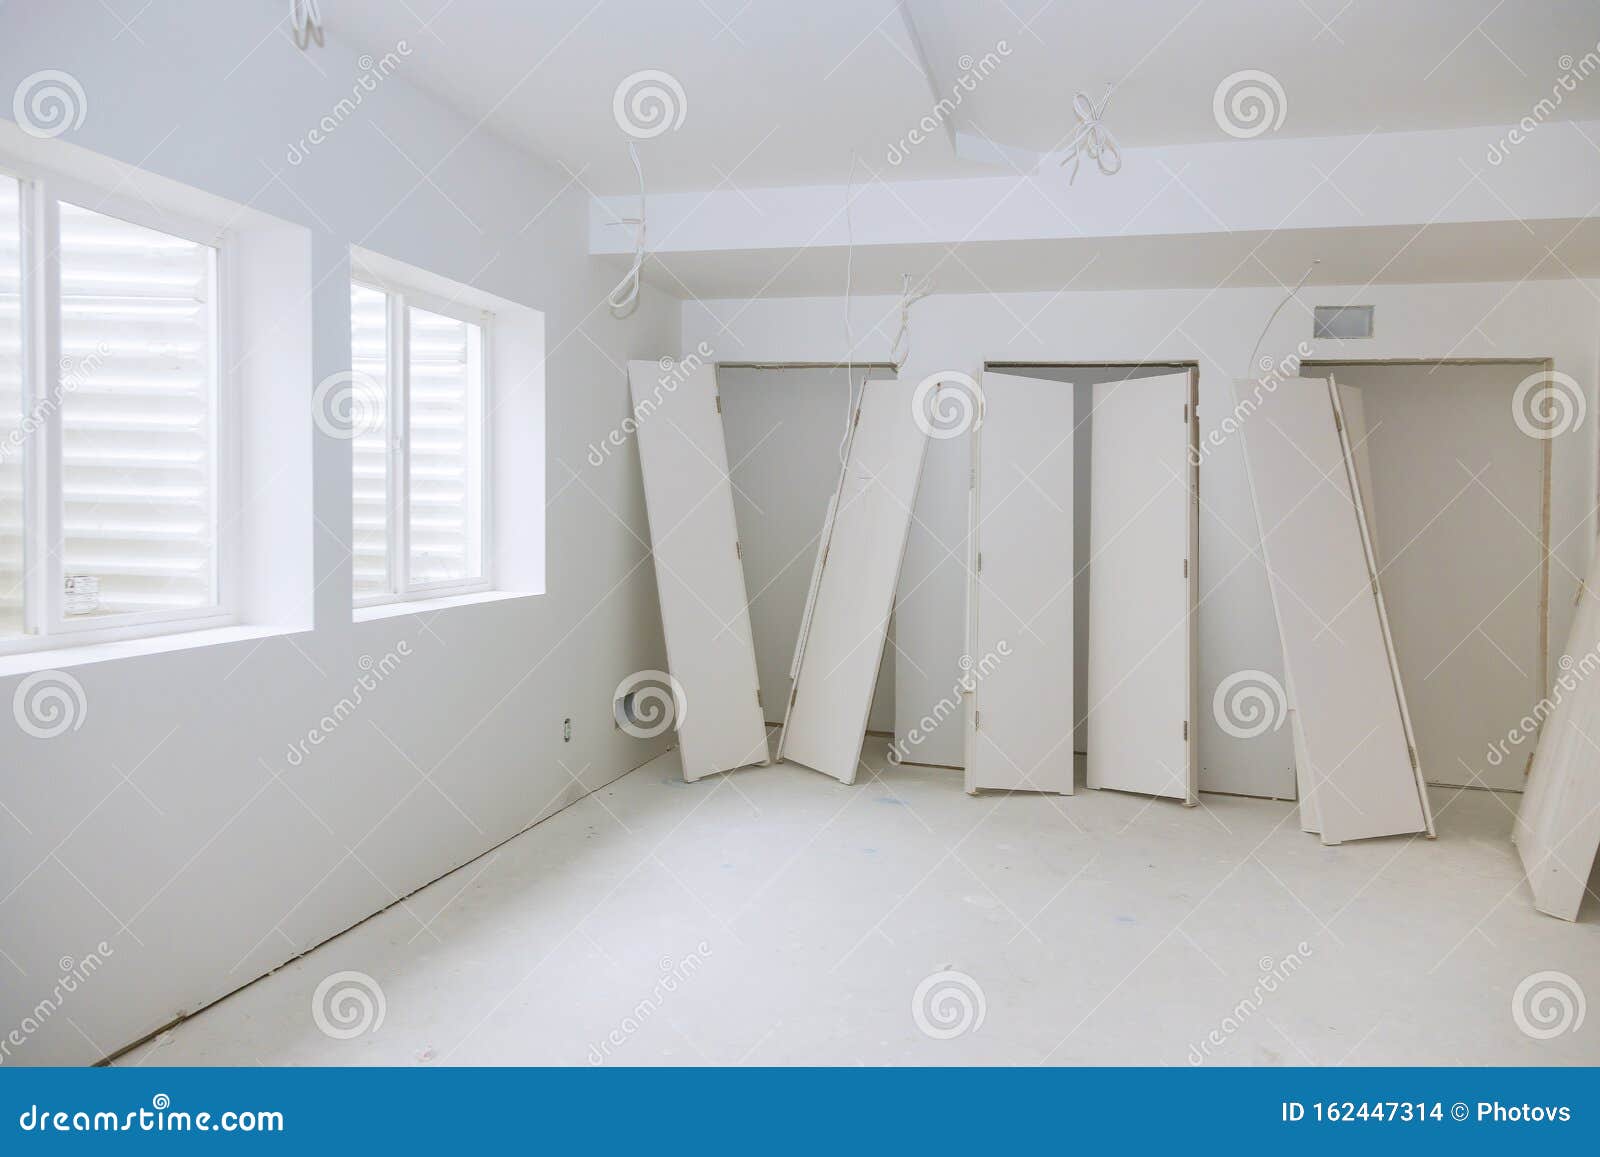 Process For Under Construction, Remodeling, Renovation, Extension, Reconstruction Stock Photo ...